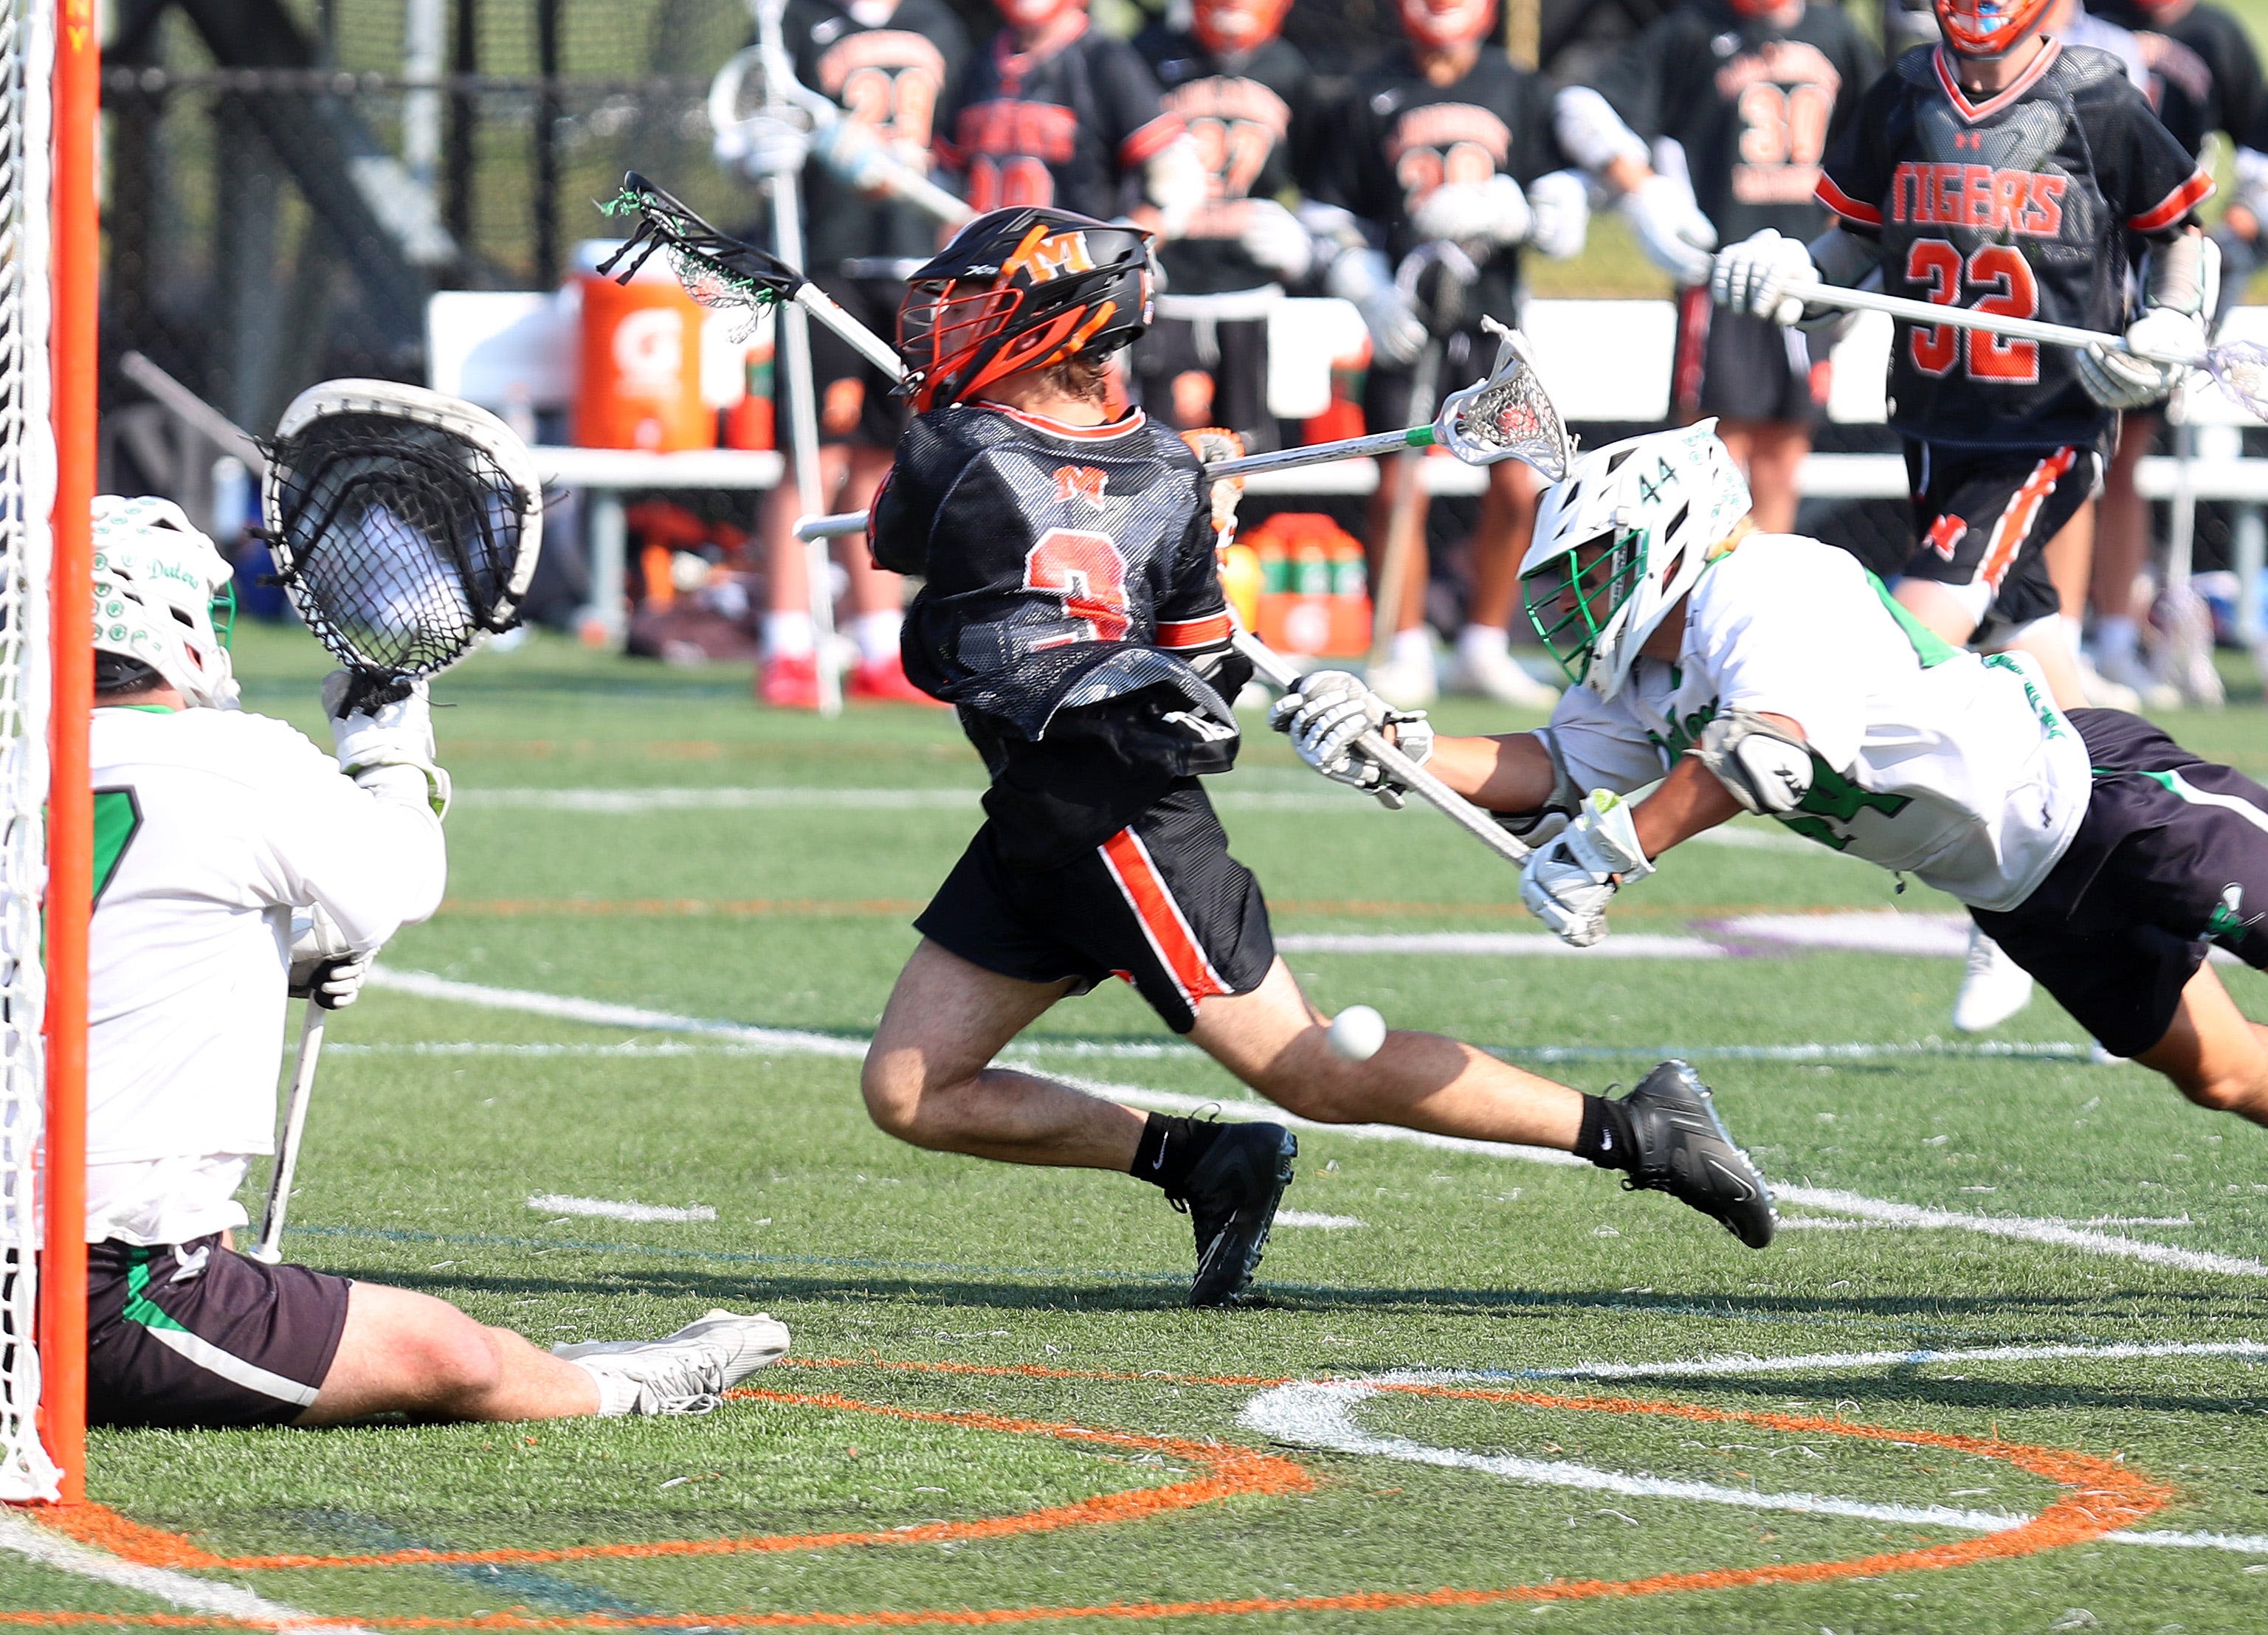 Section 1 came in hopeful, but went 0-4 against Long Island in NYSPHSAA boys lax semis